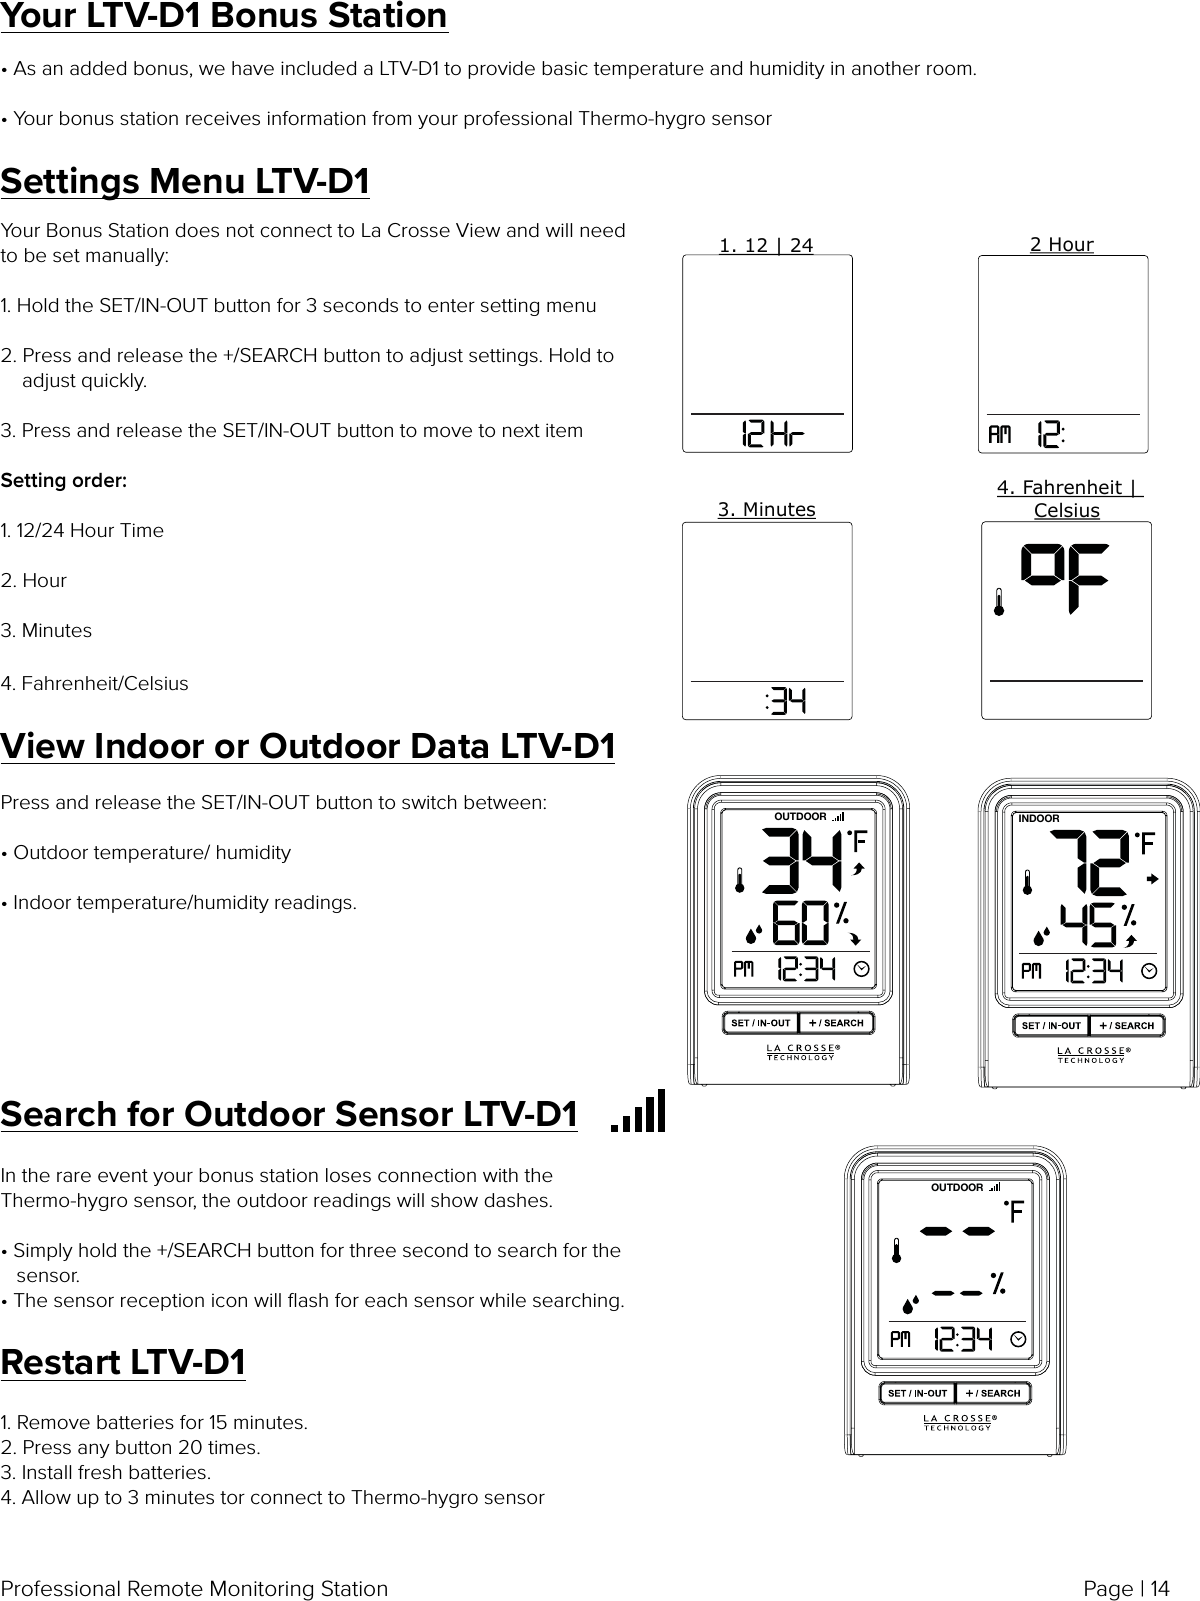 Page | 14Professional Remote Monitoring StationView Indoor or Outdoor Data LTV-D1Press and release the SET/IN-OUT button to switch between:• Outdoor temperature/ humidity  • Indoor temperature/humidity readings.OUTDOOR INDOORSearch for Outdoor Sensor LTV-D1In the rare event your bonus station loses connection with the Thermo-hygro sensor, the outdoor readings will show dashes.• Simply hold the +/SEARCH button for three second to search for the    sensor.• The sensor reception icon will ﬂash for each sensor while searching.OUTDOORYour Bonus Station does not connect to La Crosse View and will need to be set manually:1. Hold the SET/IN-OUT button for 3 seconds to enter setting menu2. Press and release the +/SEARCH button to adjust settings. Hold to     adjust quickly.3. Press and release the SET/IN-OUT button to move to next item Setting order:1. 12/24 Hour Time2. Hour3. Minutes4. Fahrenheit/CelsiusSettings Menu LTV-D11. 12 | 242 Hour3. Minutes4. Fahrenheit | CelsiusYour LTV-D1 Bonus Station• As an added bonus, we have included a LTV-D1 to provide basic temperature and humidity in another room.• Your bonus station receives information from your professional Thermo-hygro sensorRestart LTV-D11. Remove batteries for 15 minutes.2. Press any button 20 times.3. Install fresh batteries.4. Allow up to 3 minutes tor connect to Thermo-hygro sensor